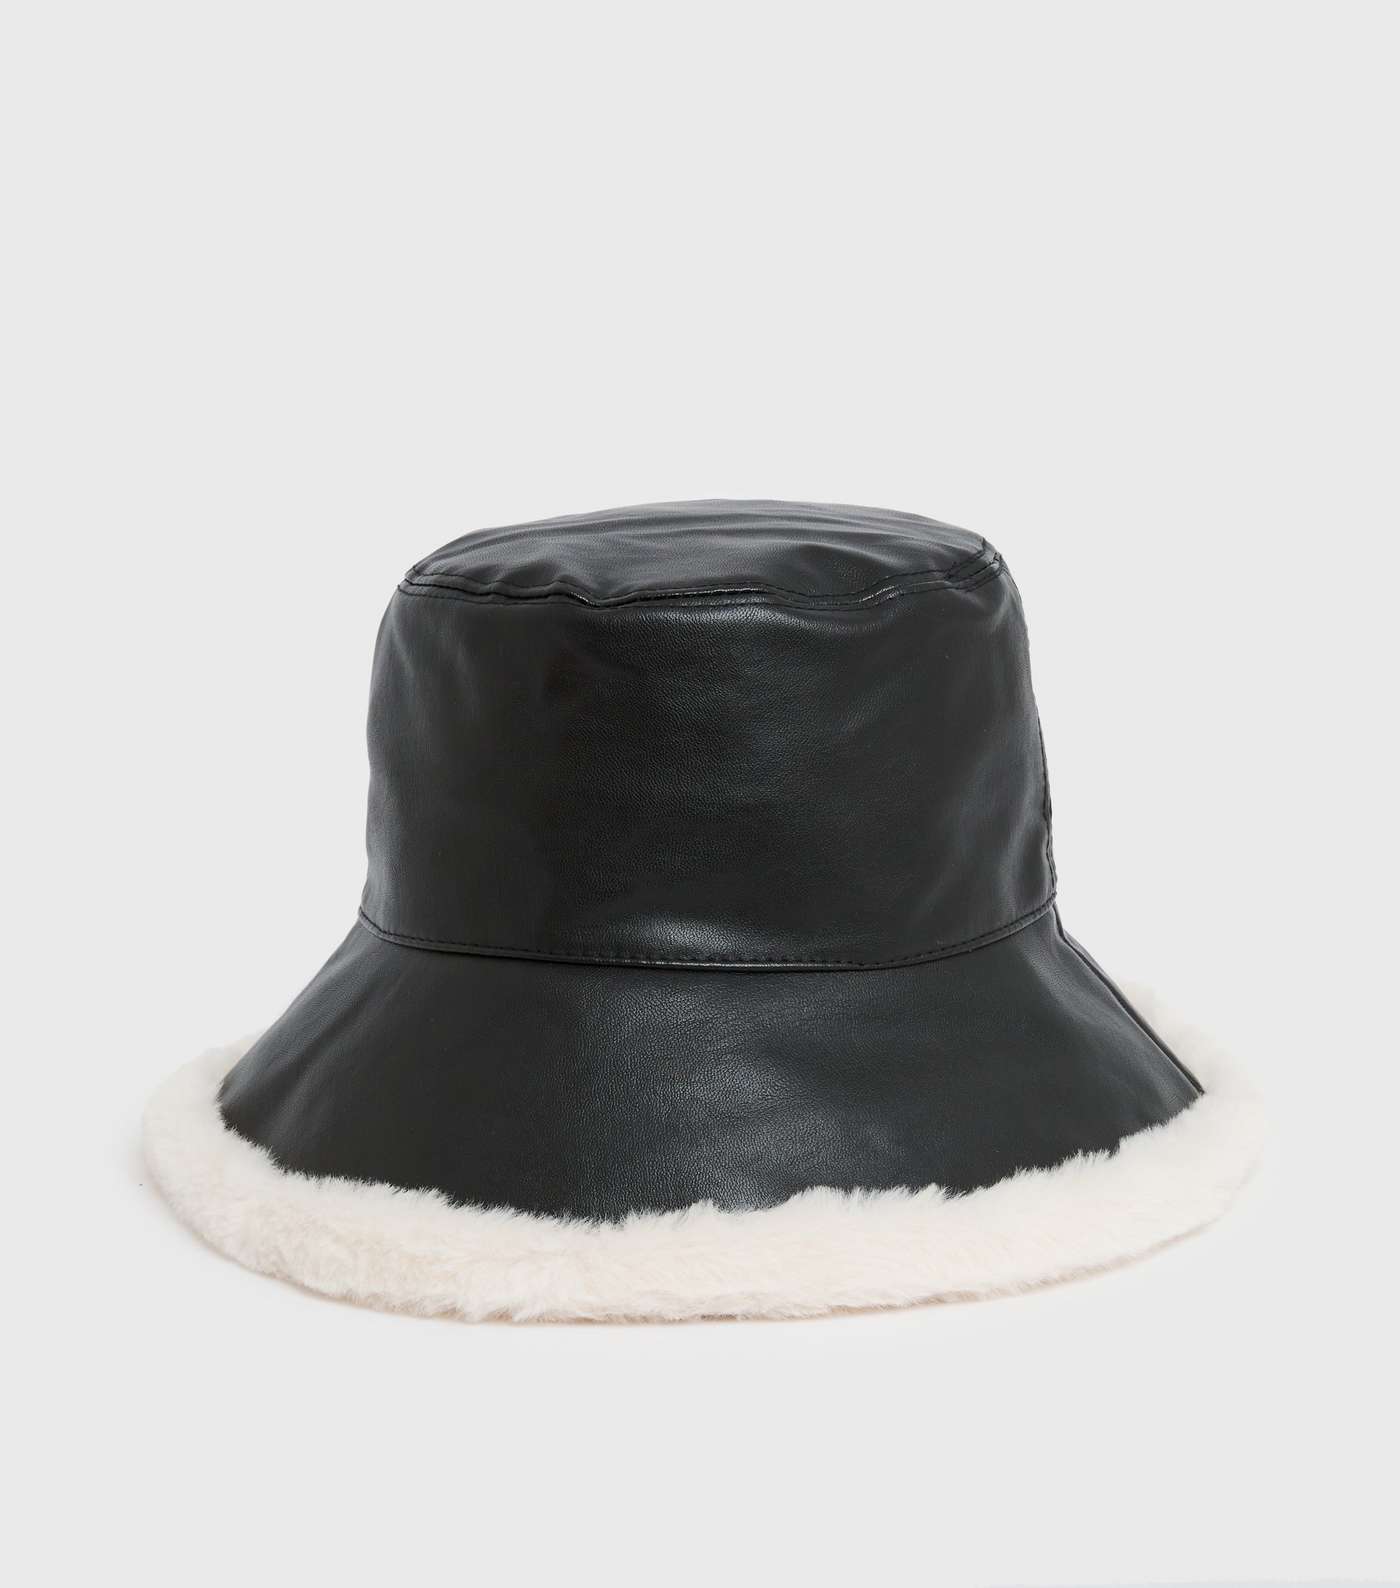 Black Leather-Look Shearling Trim Bucket Hat Image 2